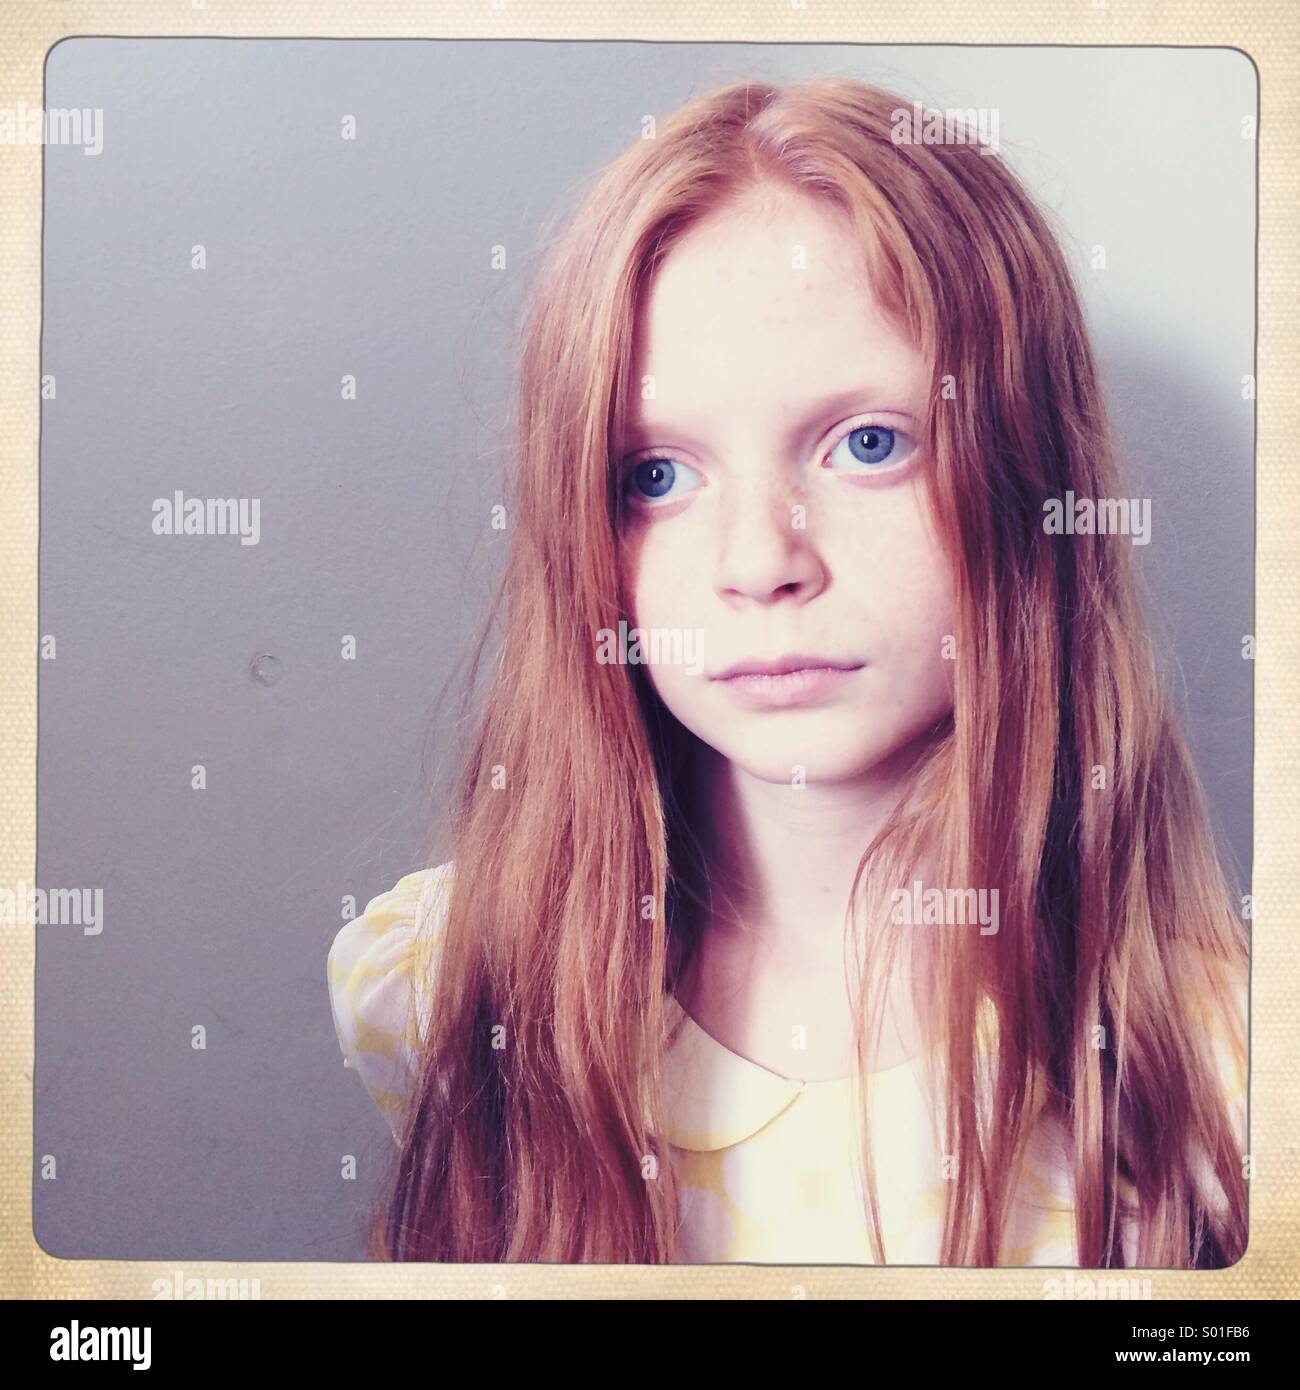 Red haired girl stares blankly off camera with a plain grey background Stock Photo